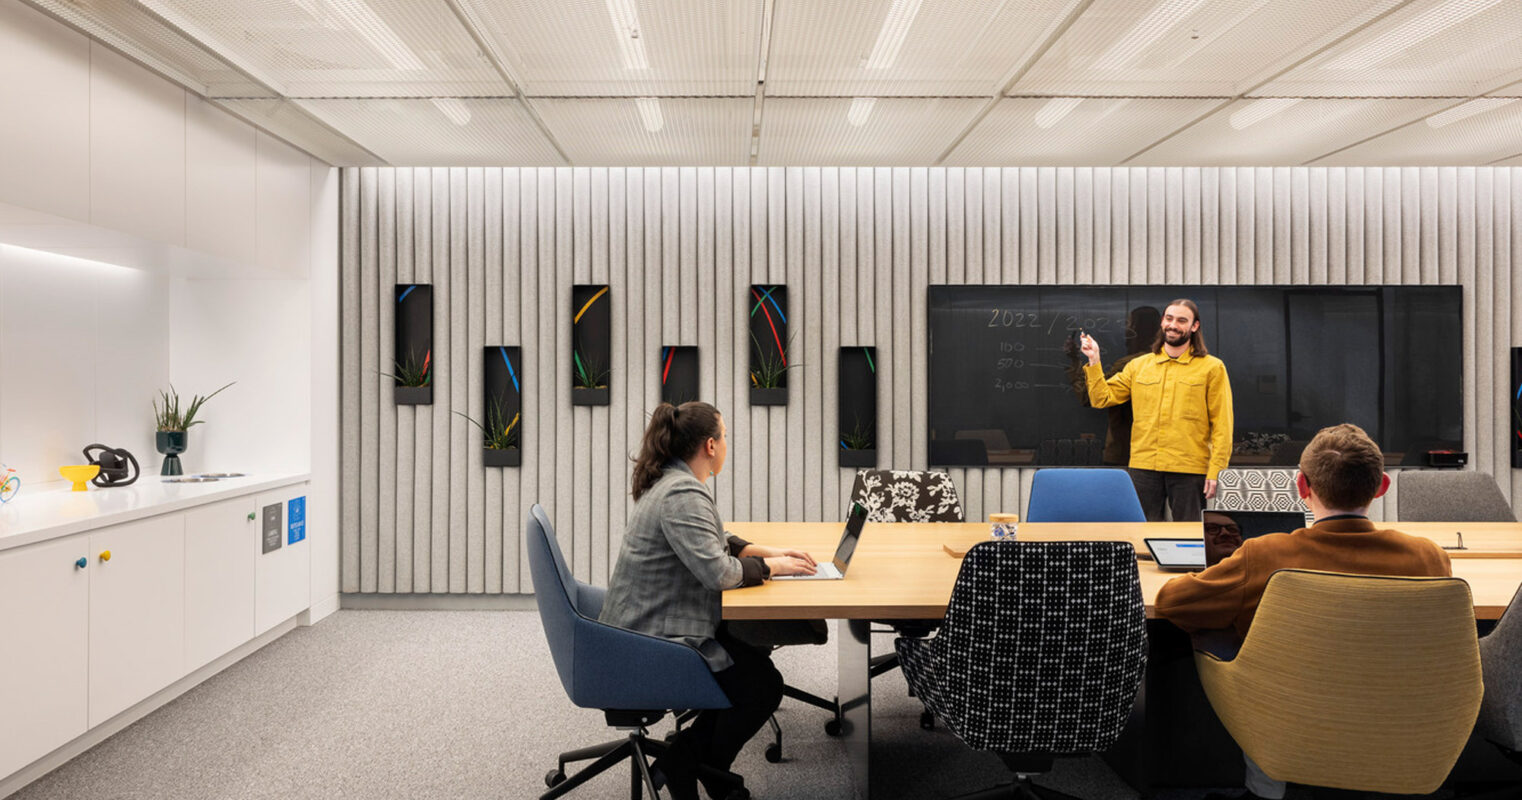 Modern conference room featuring a minimalist design with a central wooden table surrounded by ergonomic chairs, a presenter stands before a chalkboard wall, and ambient lighting complements acoustic ceiling panels. Bright accents from wall art add visual interest.